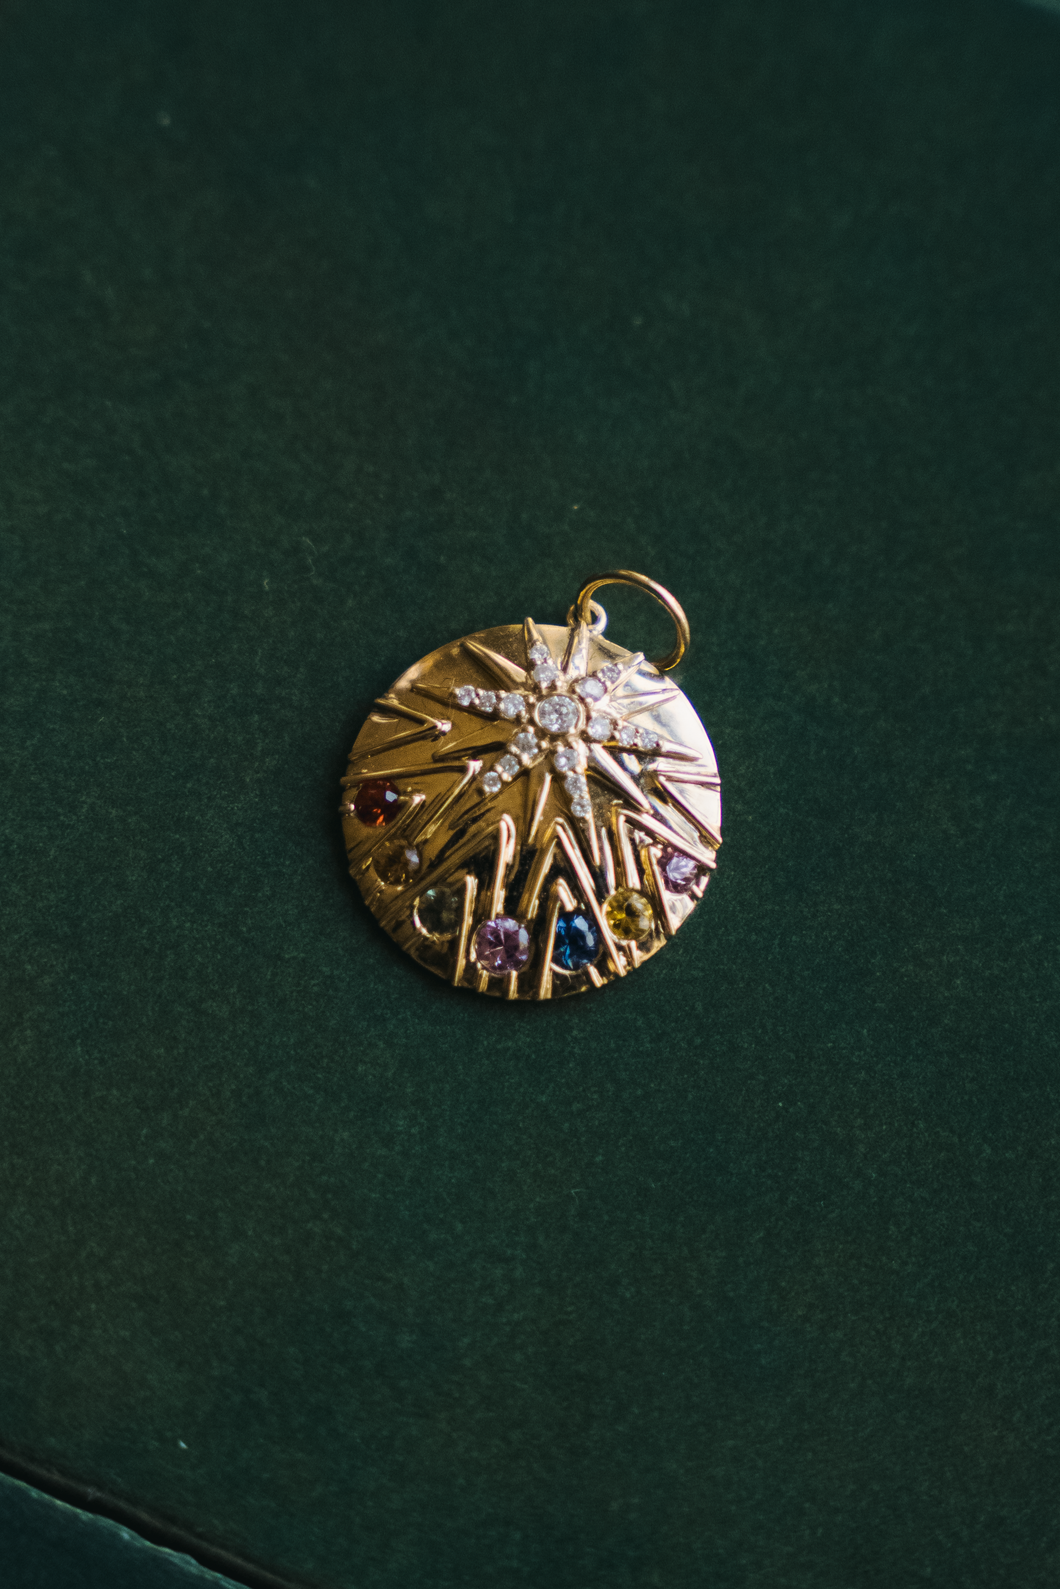 14K GOLD CHARM, STAR PENDANT WITH RAINBOW SAPPHIRES AND DIAMONDS